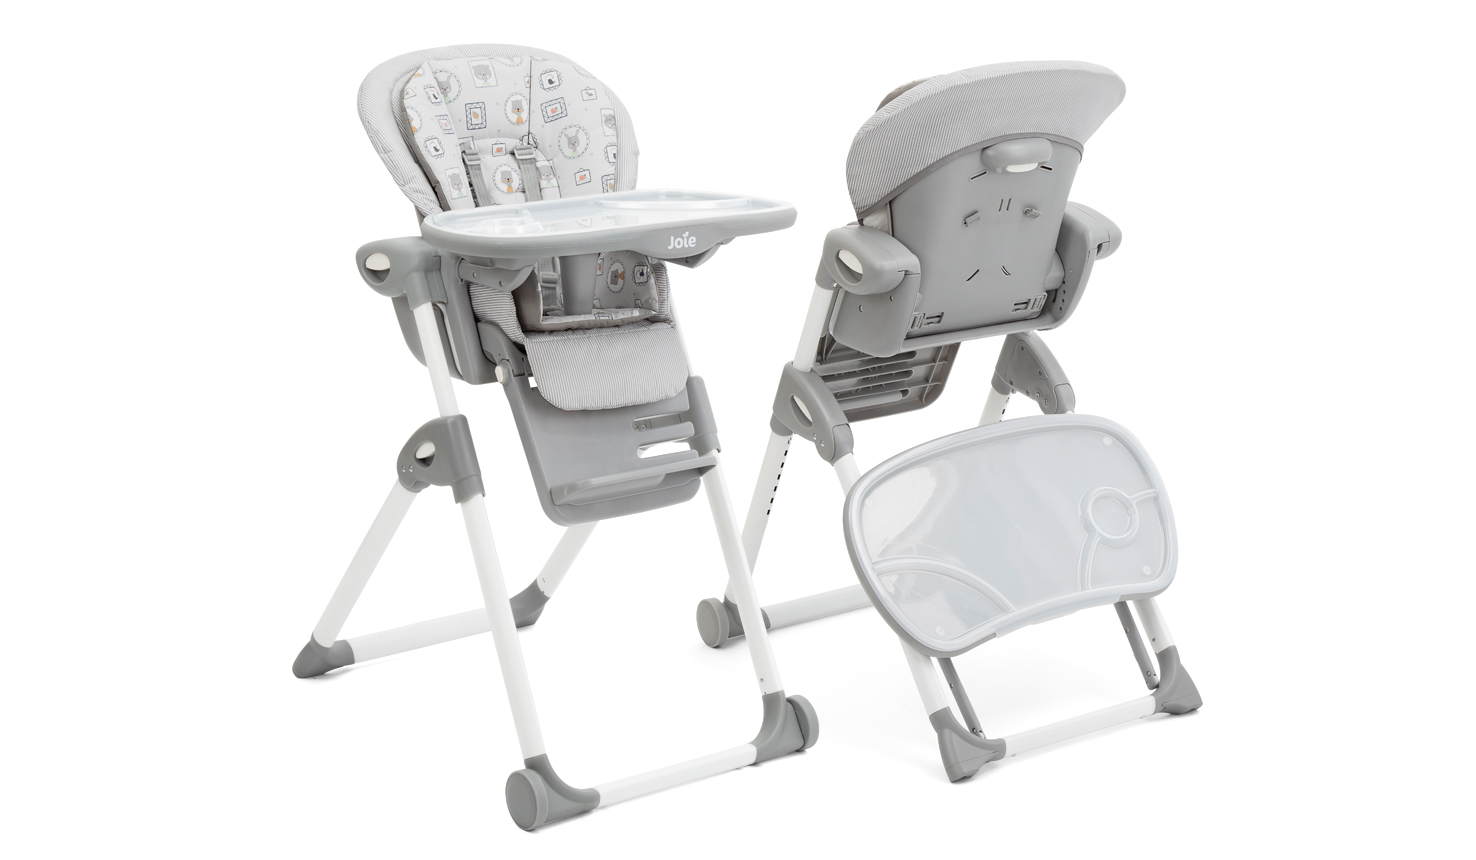 Two Mimzy Recline highchairs shown at an angle: the chair on the left facing forward with tray attached, and chair on the right facing backward with the tray stored on the back legs.